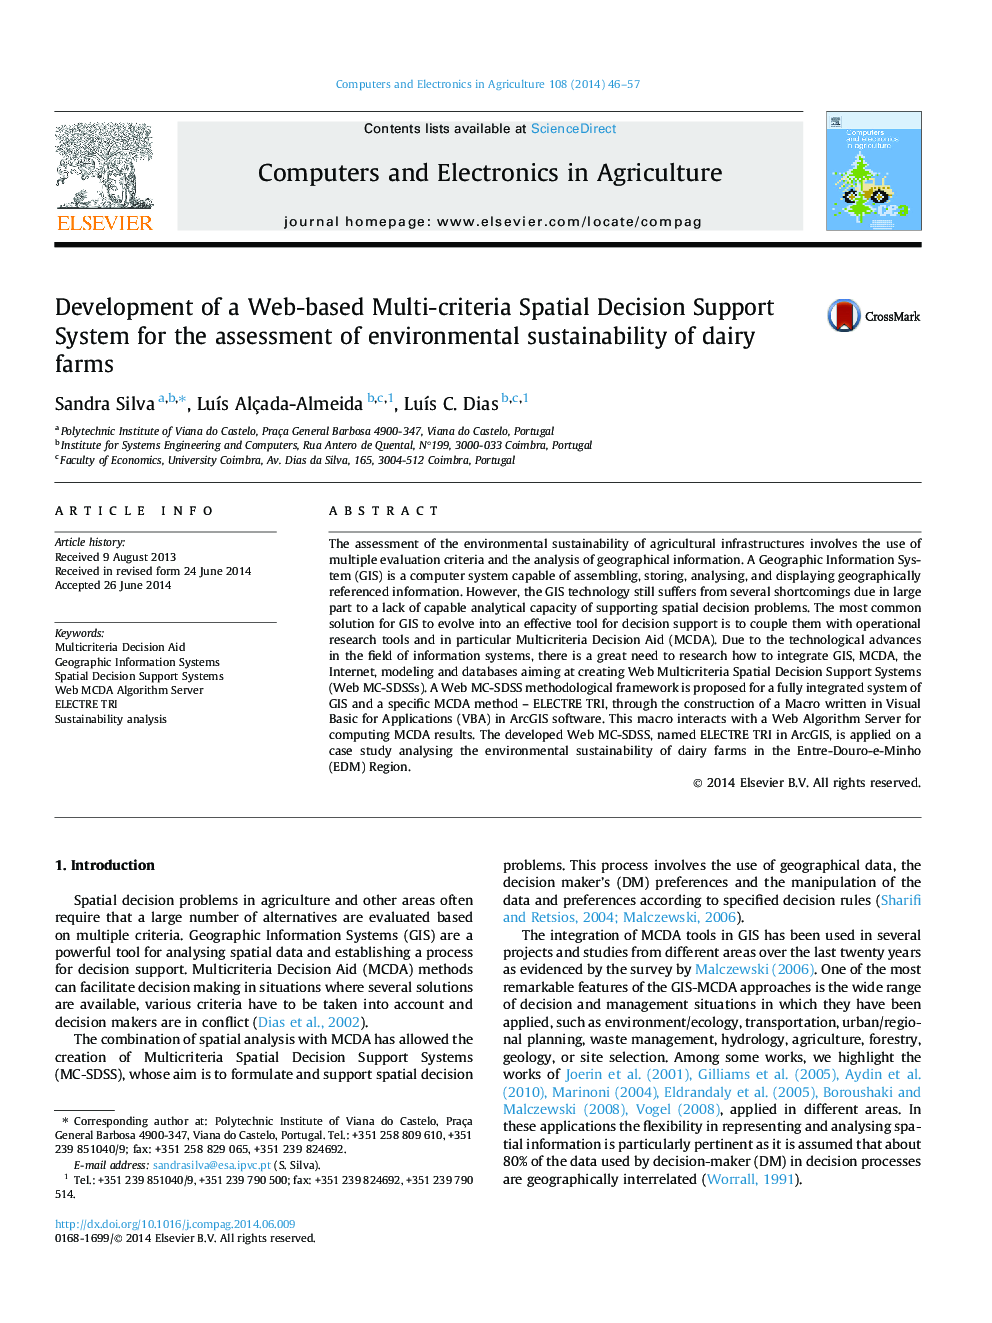 Development of a Web-based Multi-criteria Spatial Decision Support System for the assessment of environmental sustainability of dairy farms